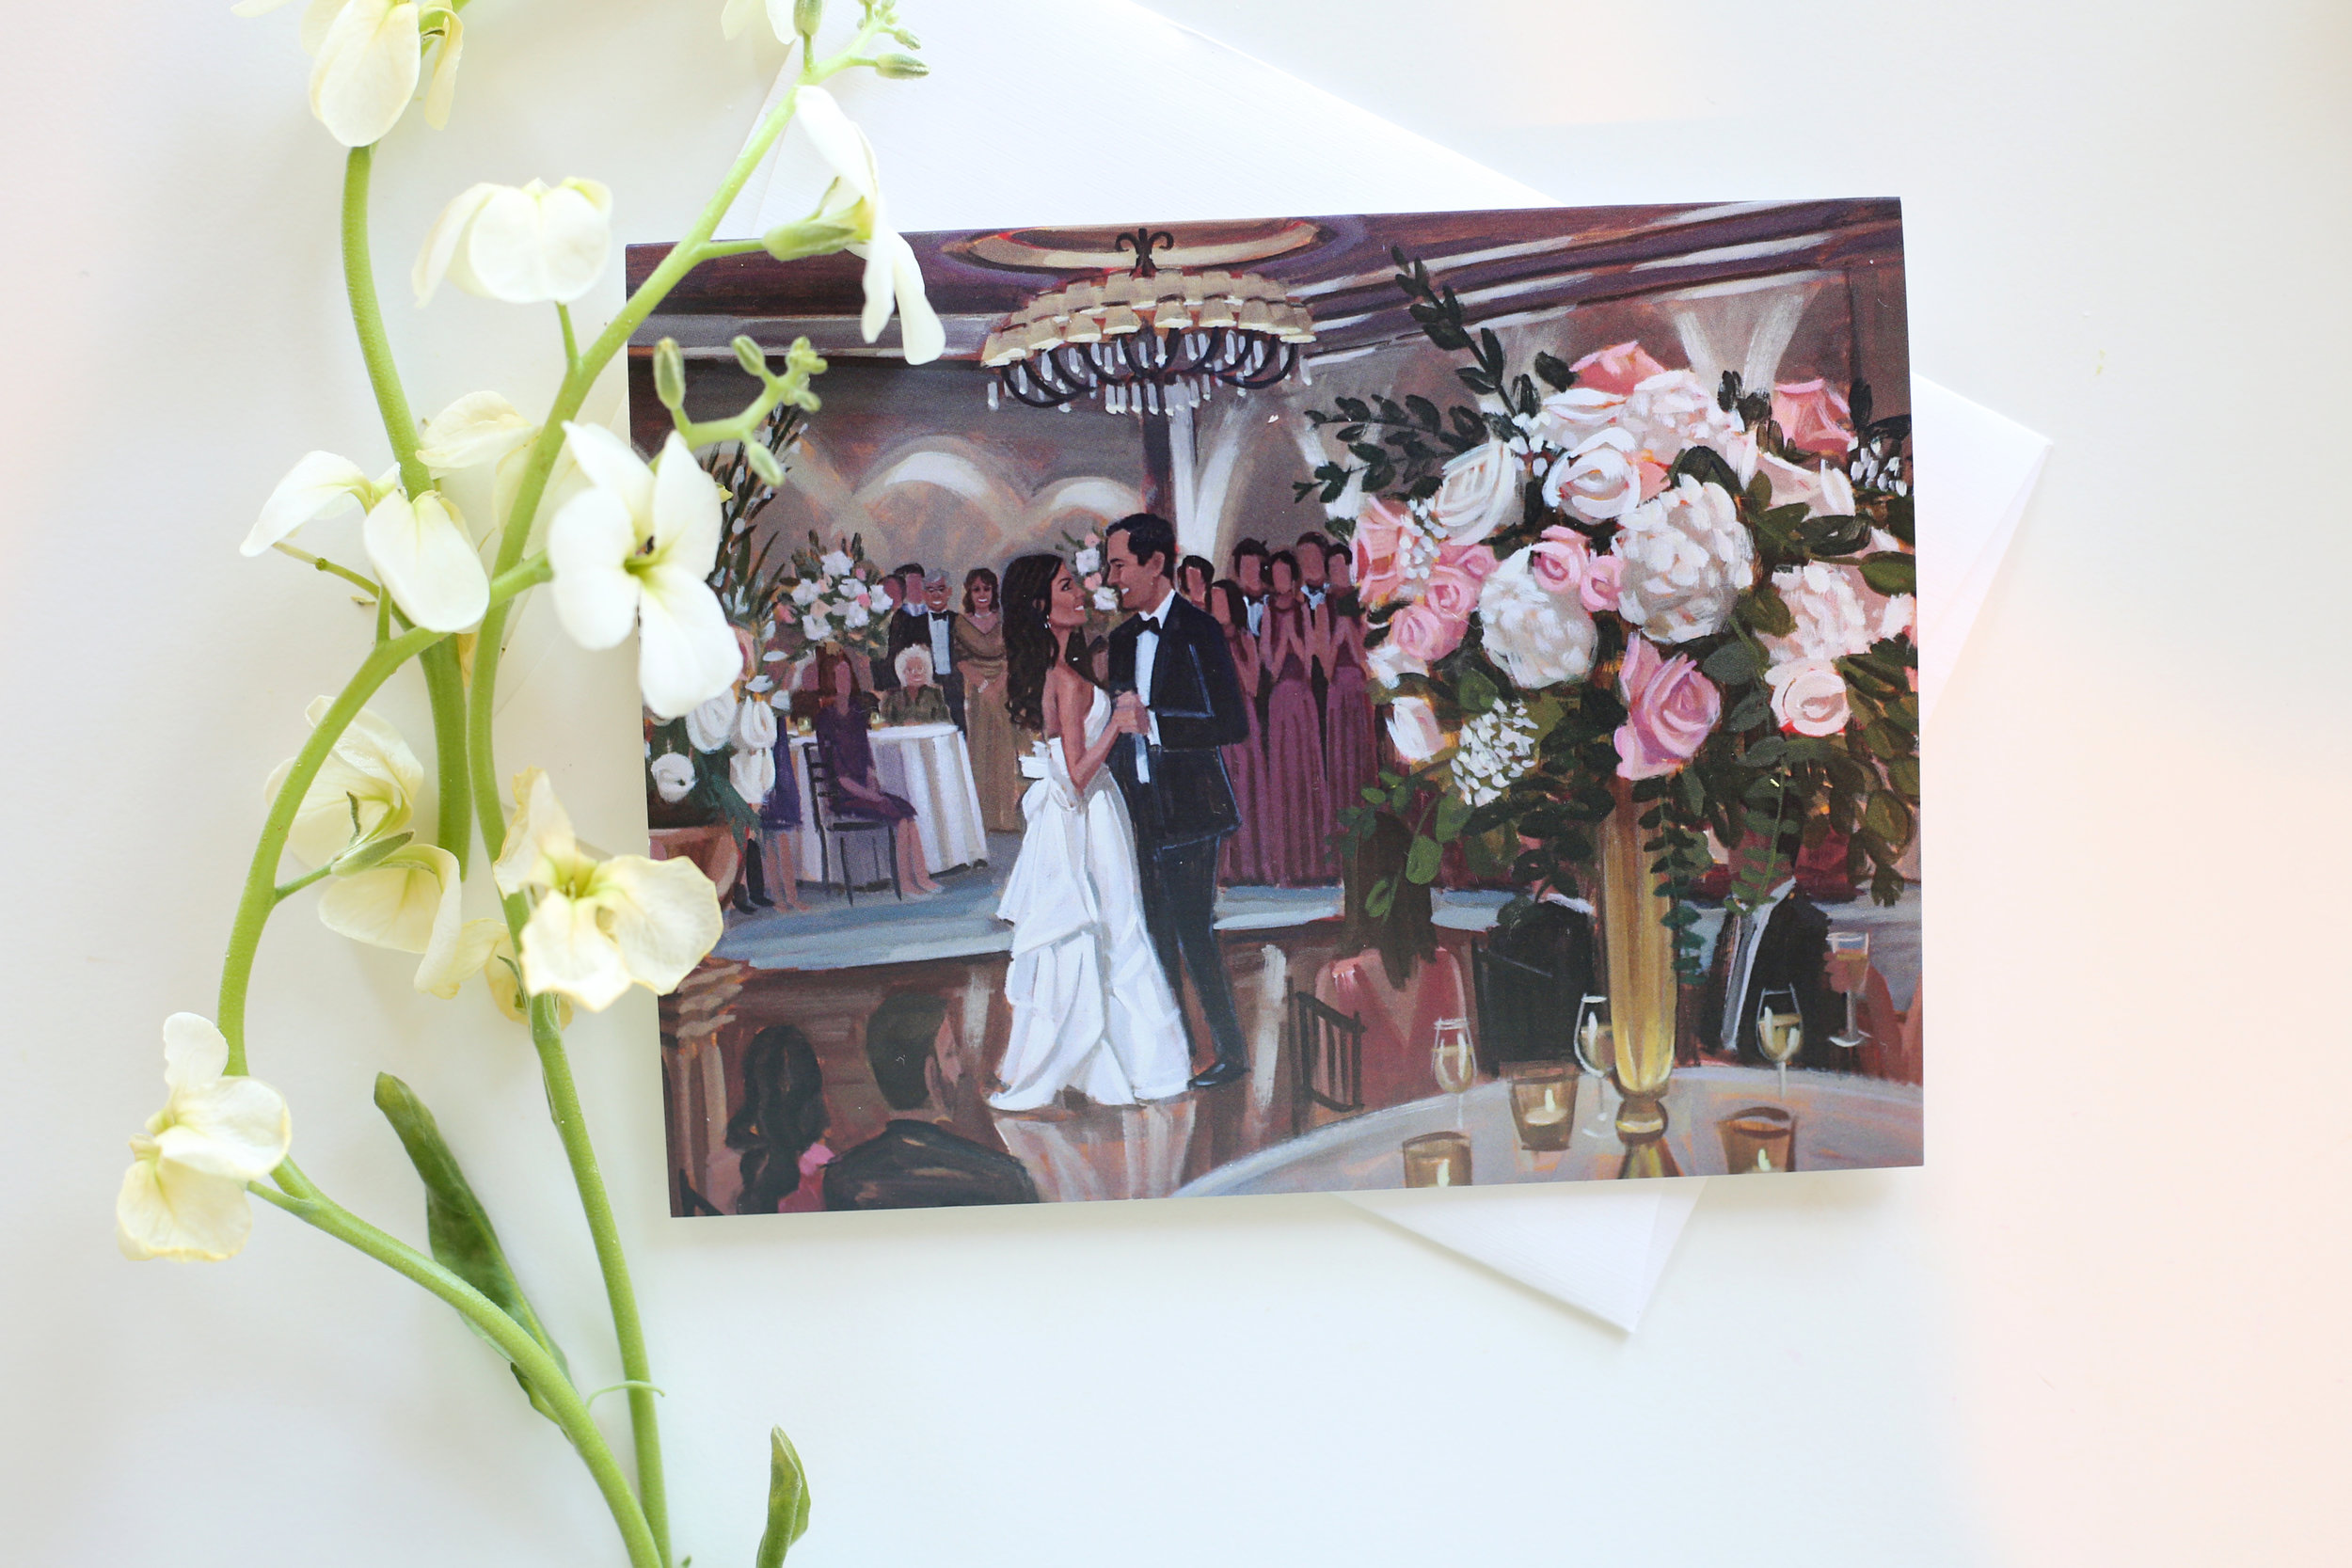 Nettie + Mitch ordered a set of our custom stationery featuring their live wedding painting!  | Photo by Jennifer Keys